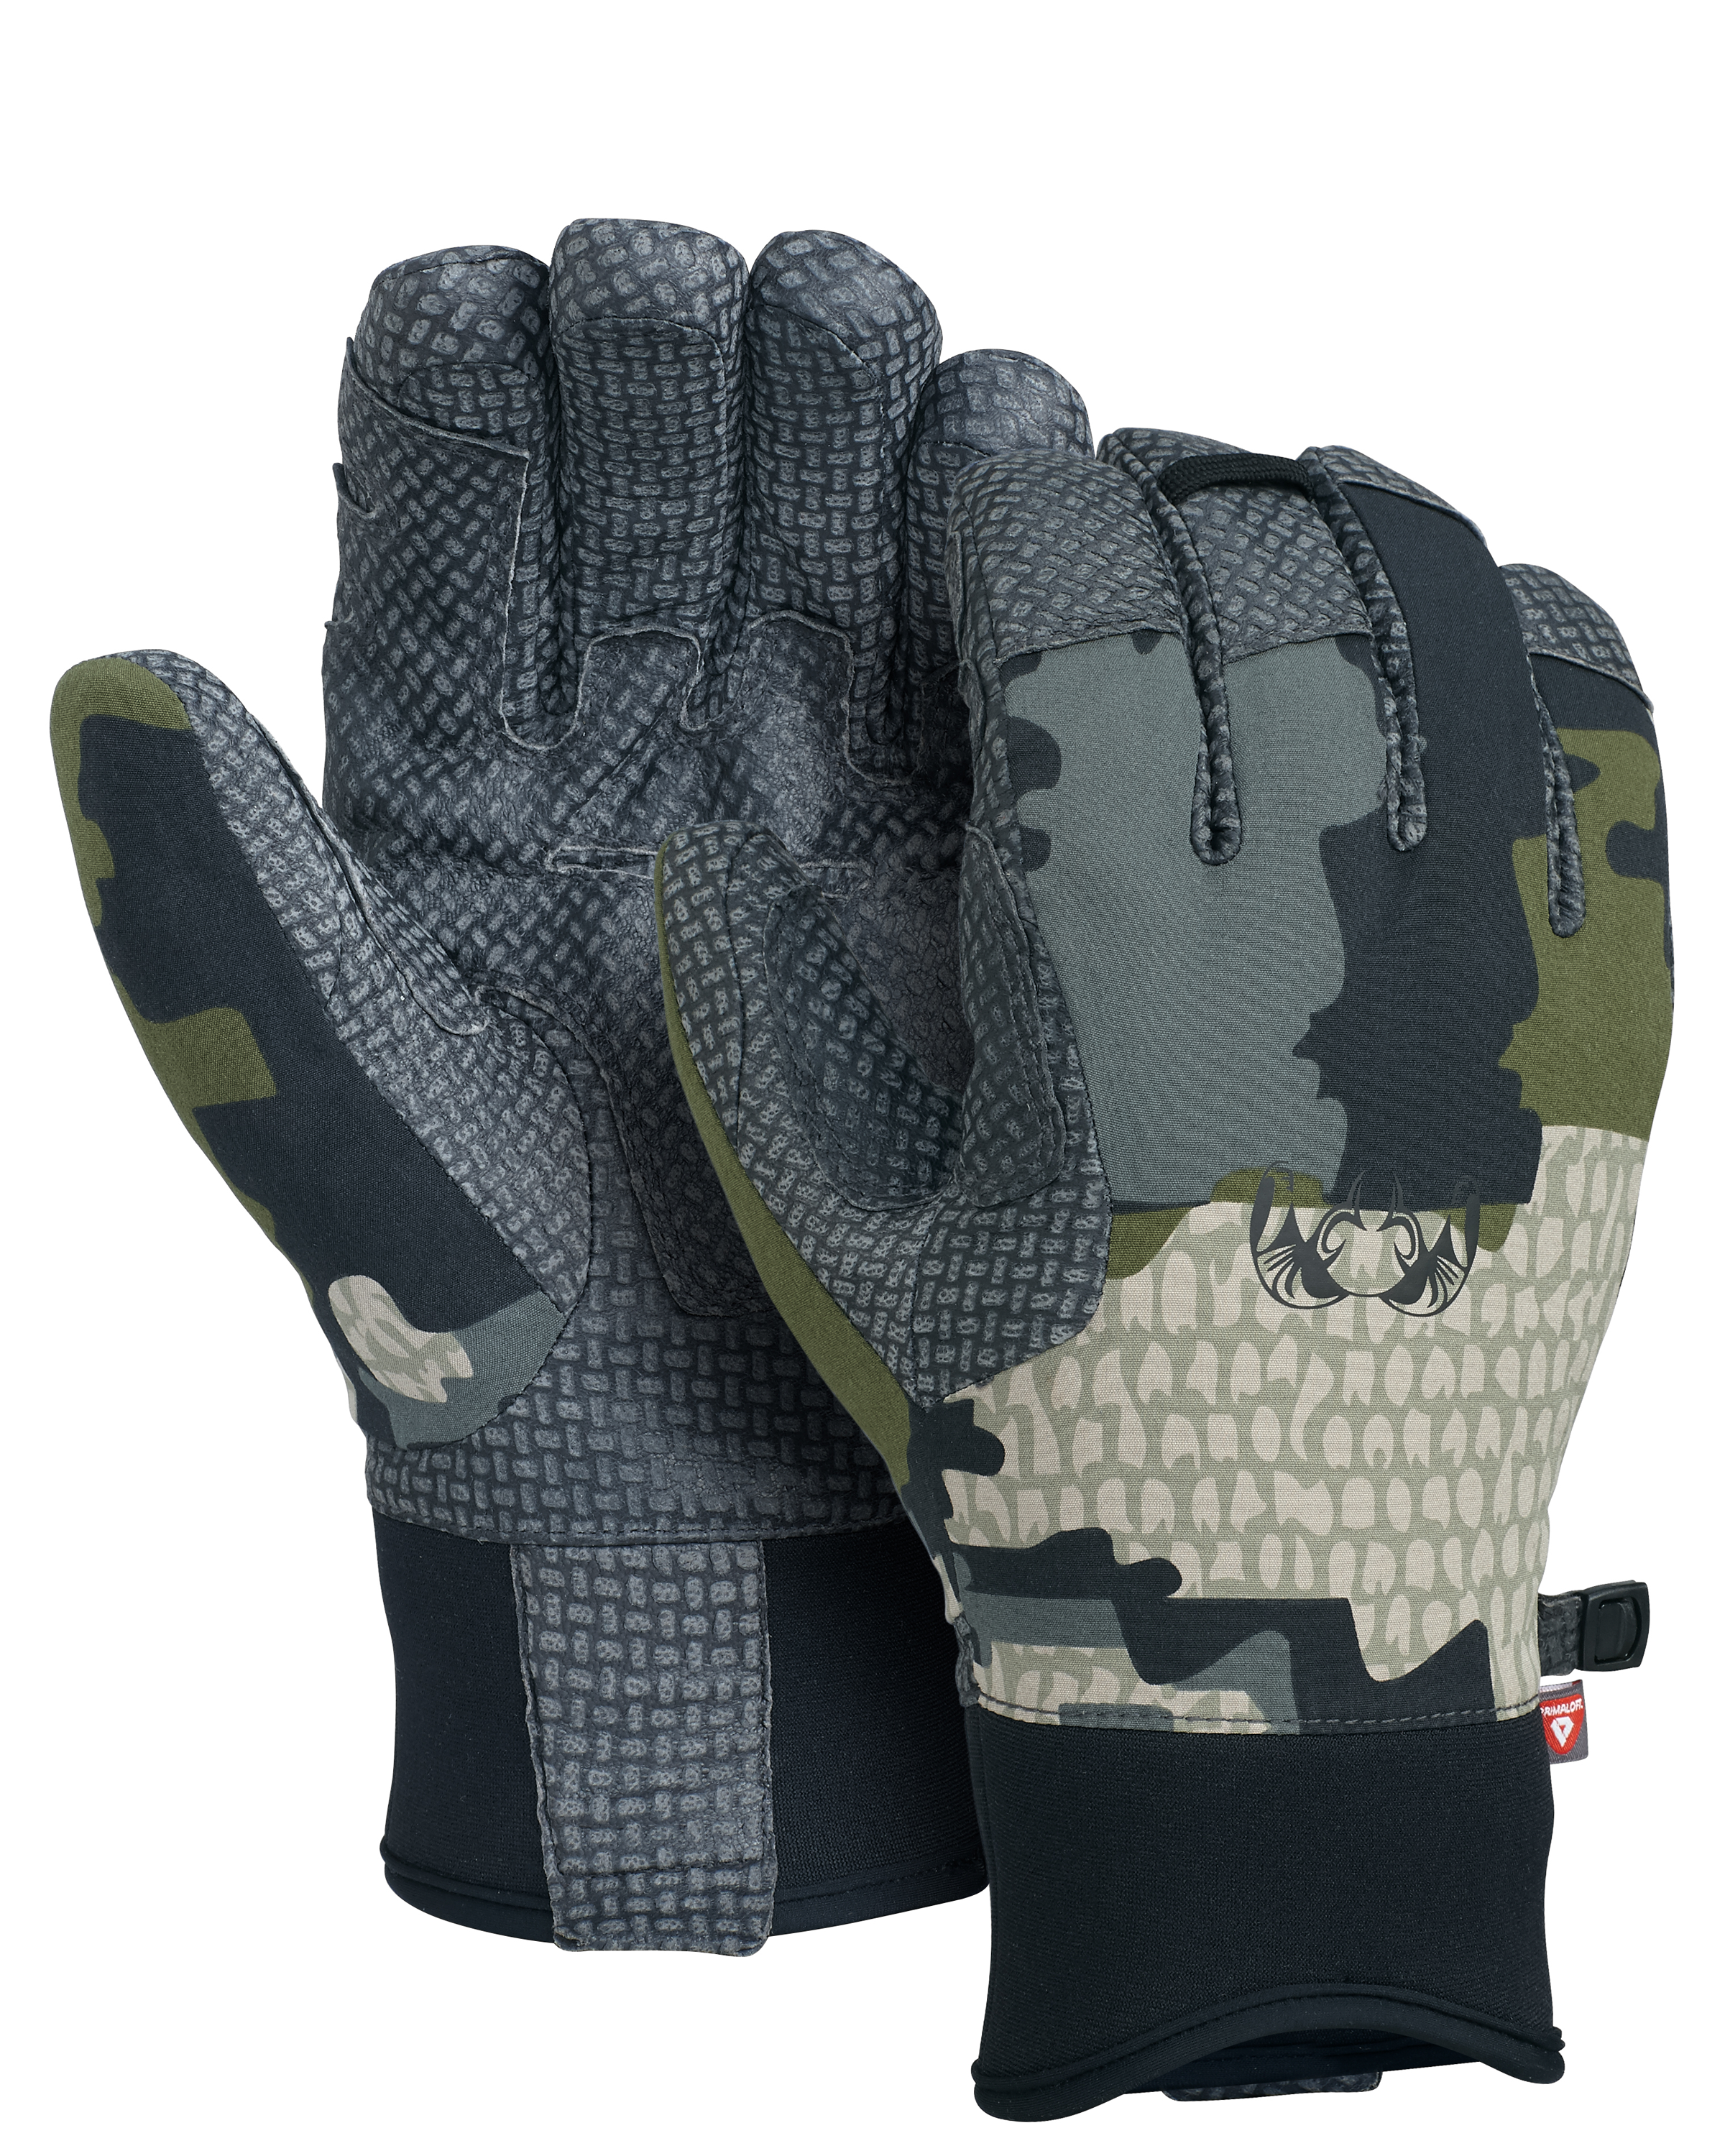 KUIU Expedition Hunting Glove in Verde | Size Medium